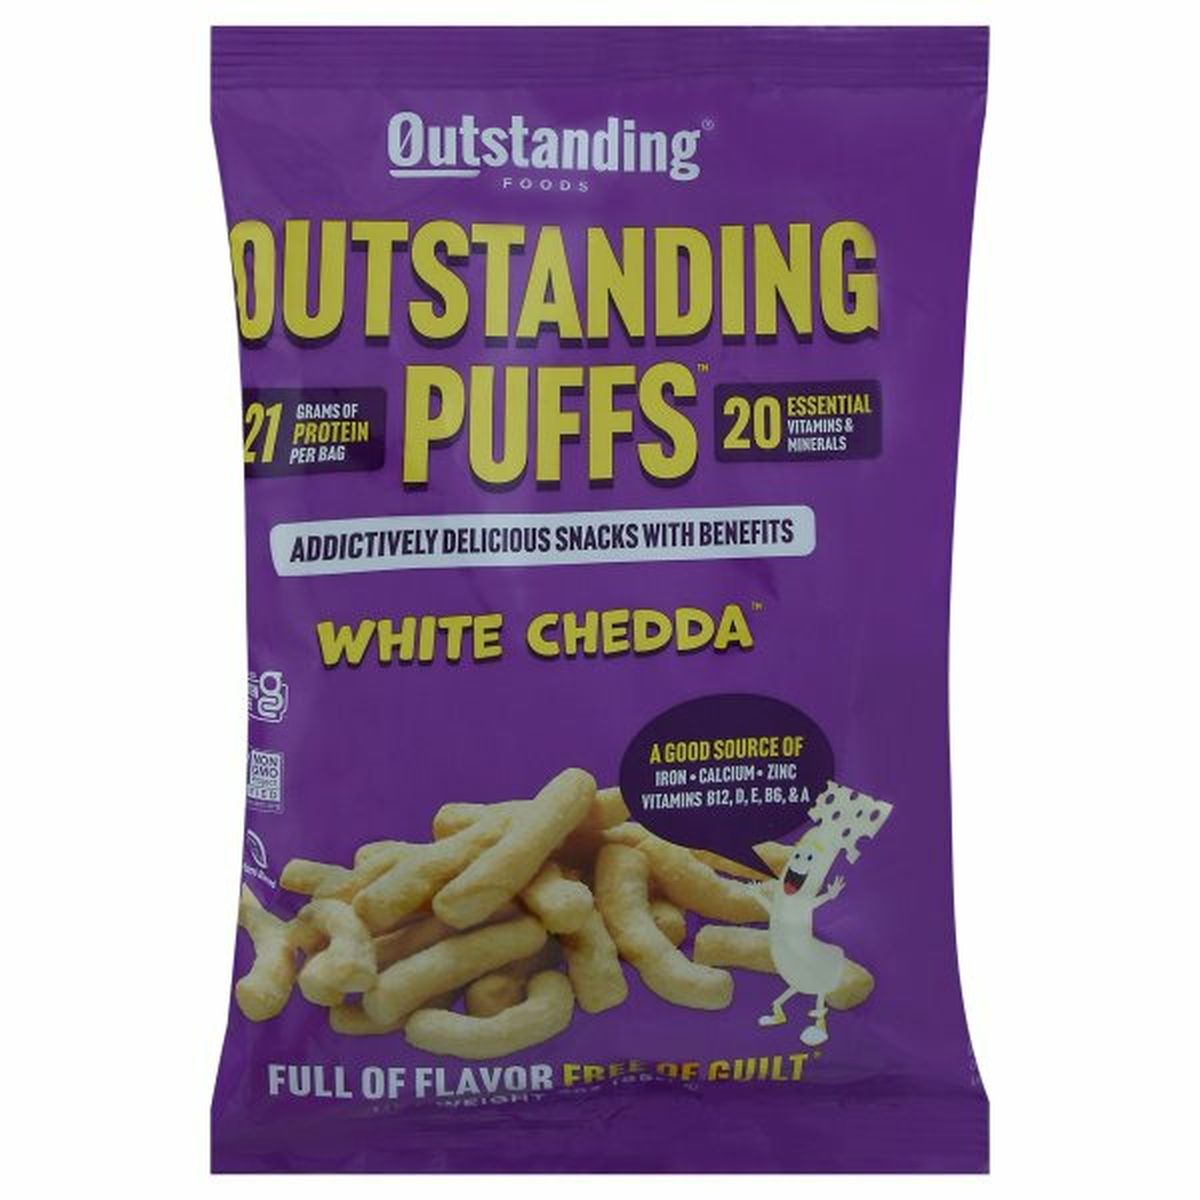 Calories in Outstanding Foods Puffs, White Chedda